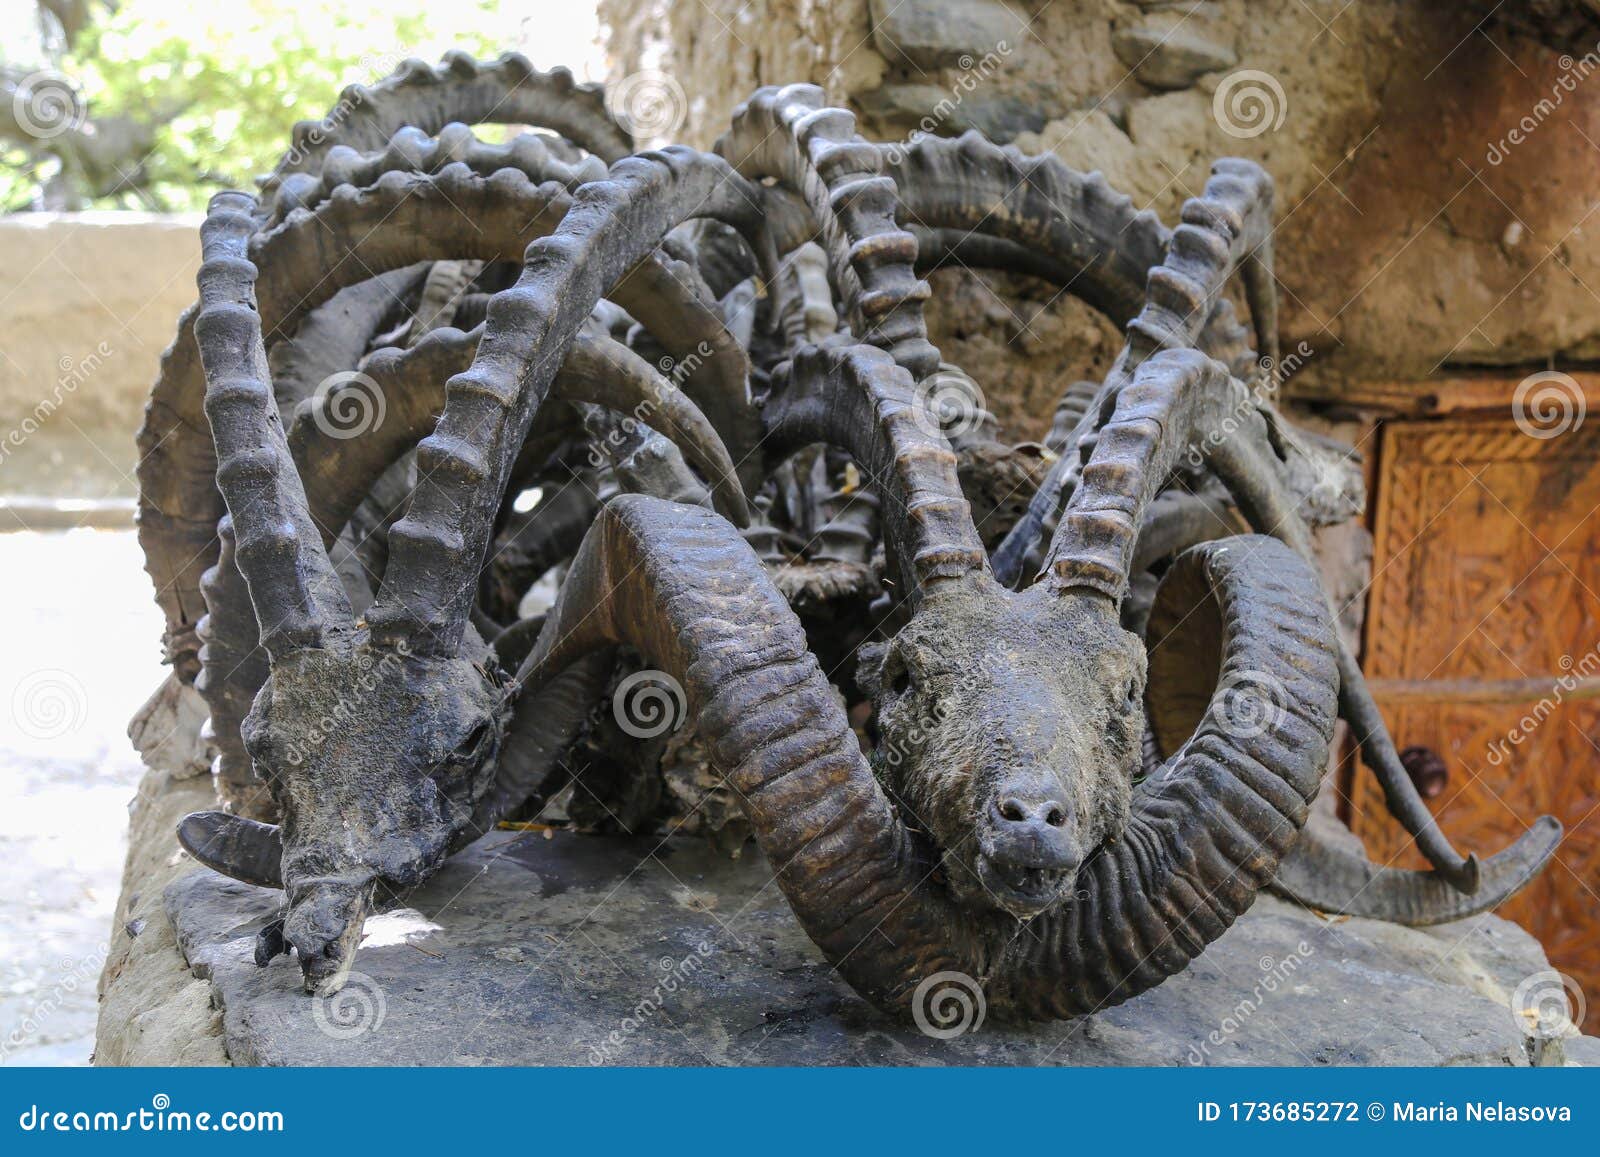 Horns and Skulls of Sheeps Marco Polo and Capricorns in a Mazar in the  Pamir Mountains Stock Photo - Image of goat, horned: 173685272